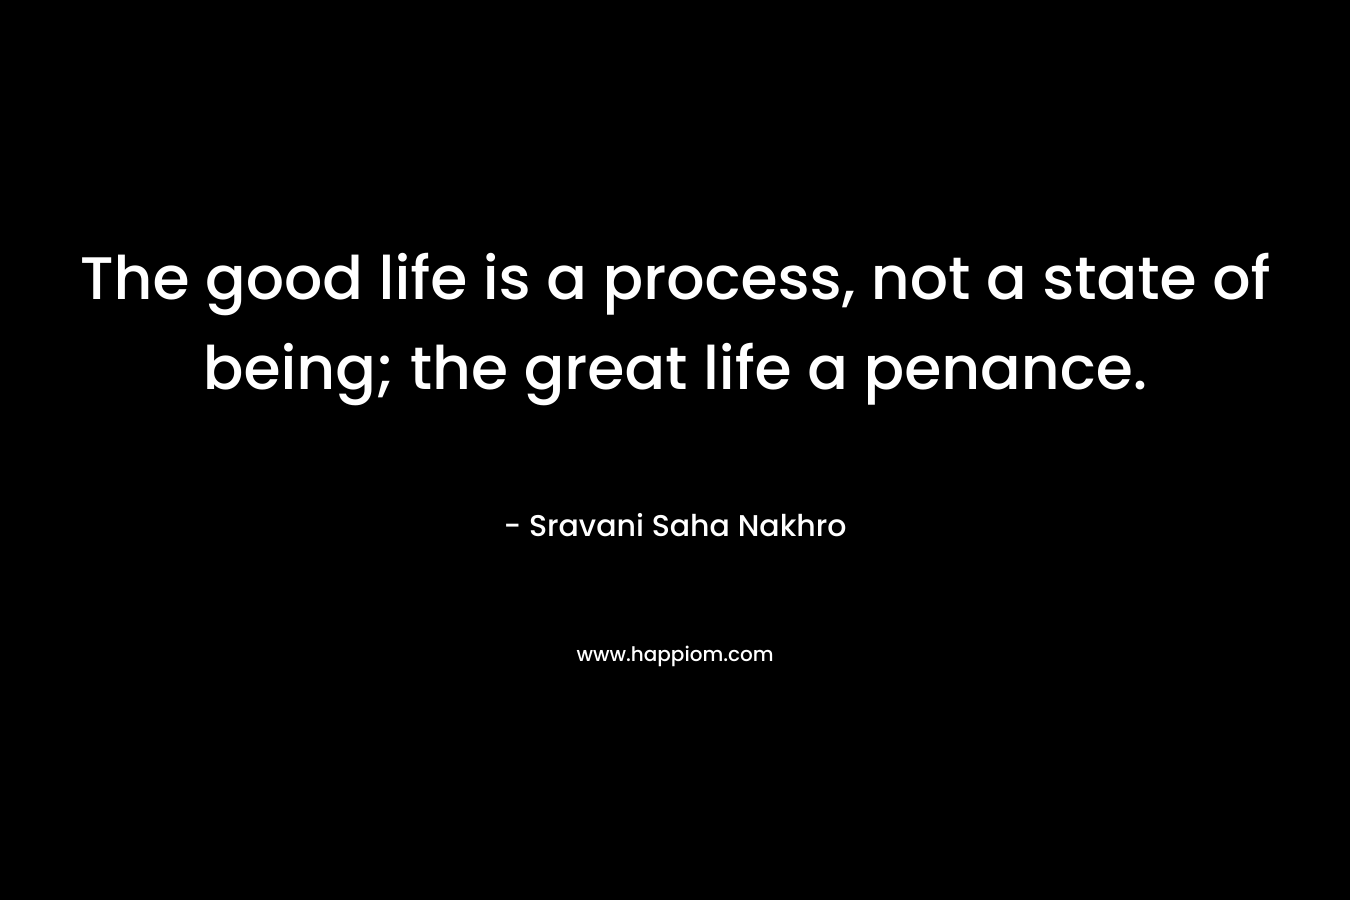 The good life is a process, not a state of being; the great life a penance.